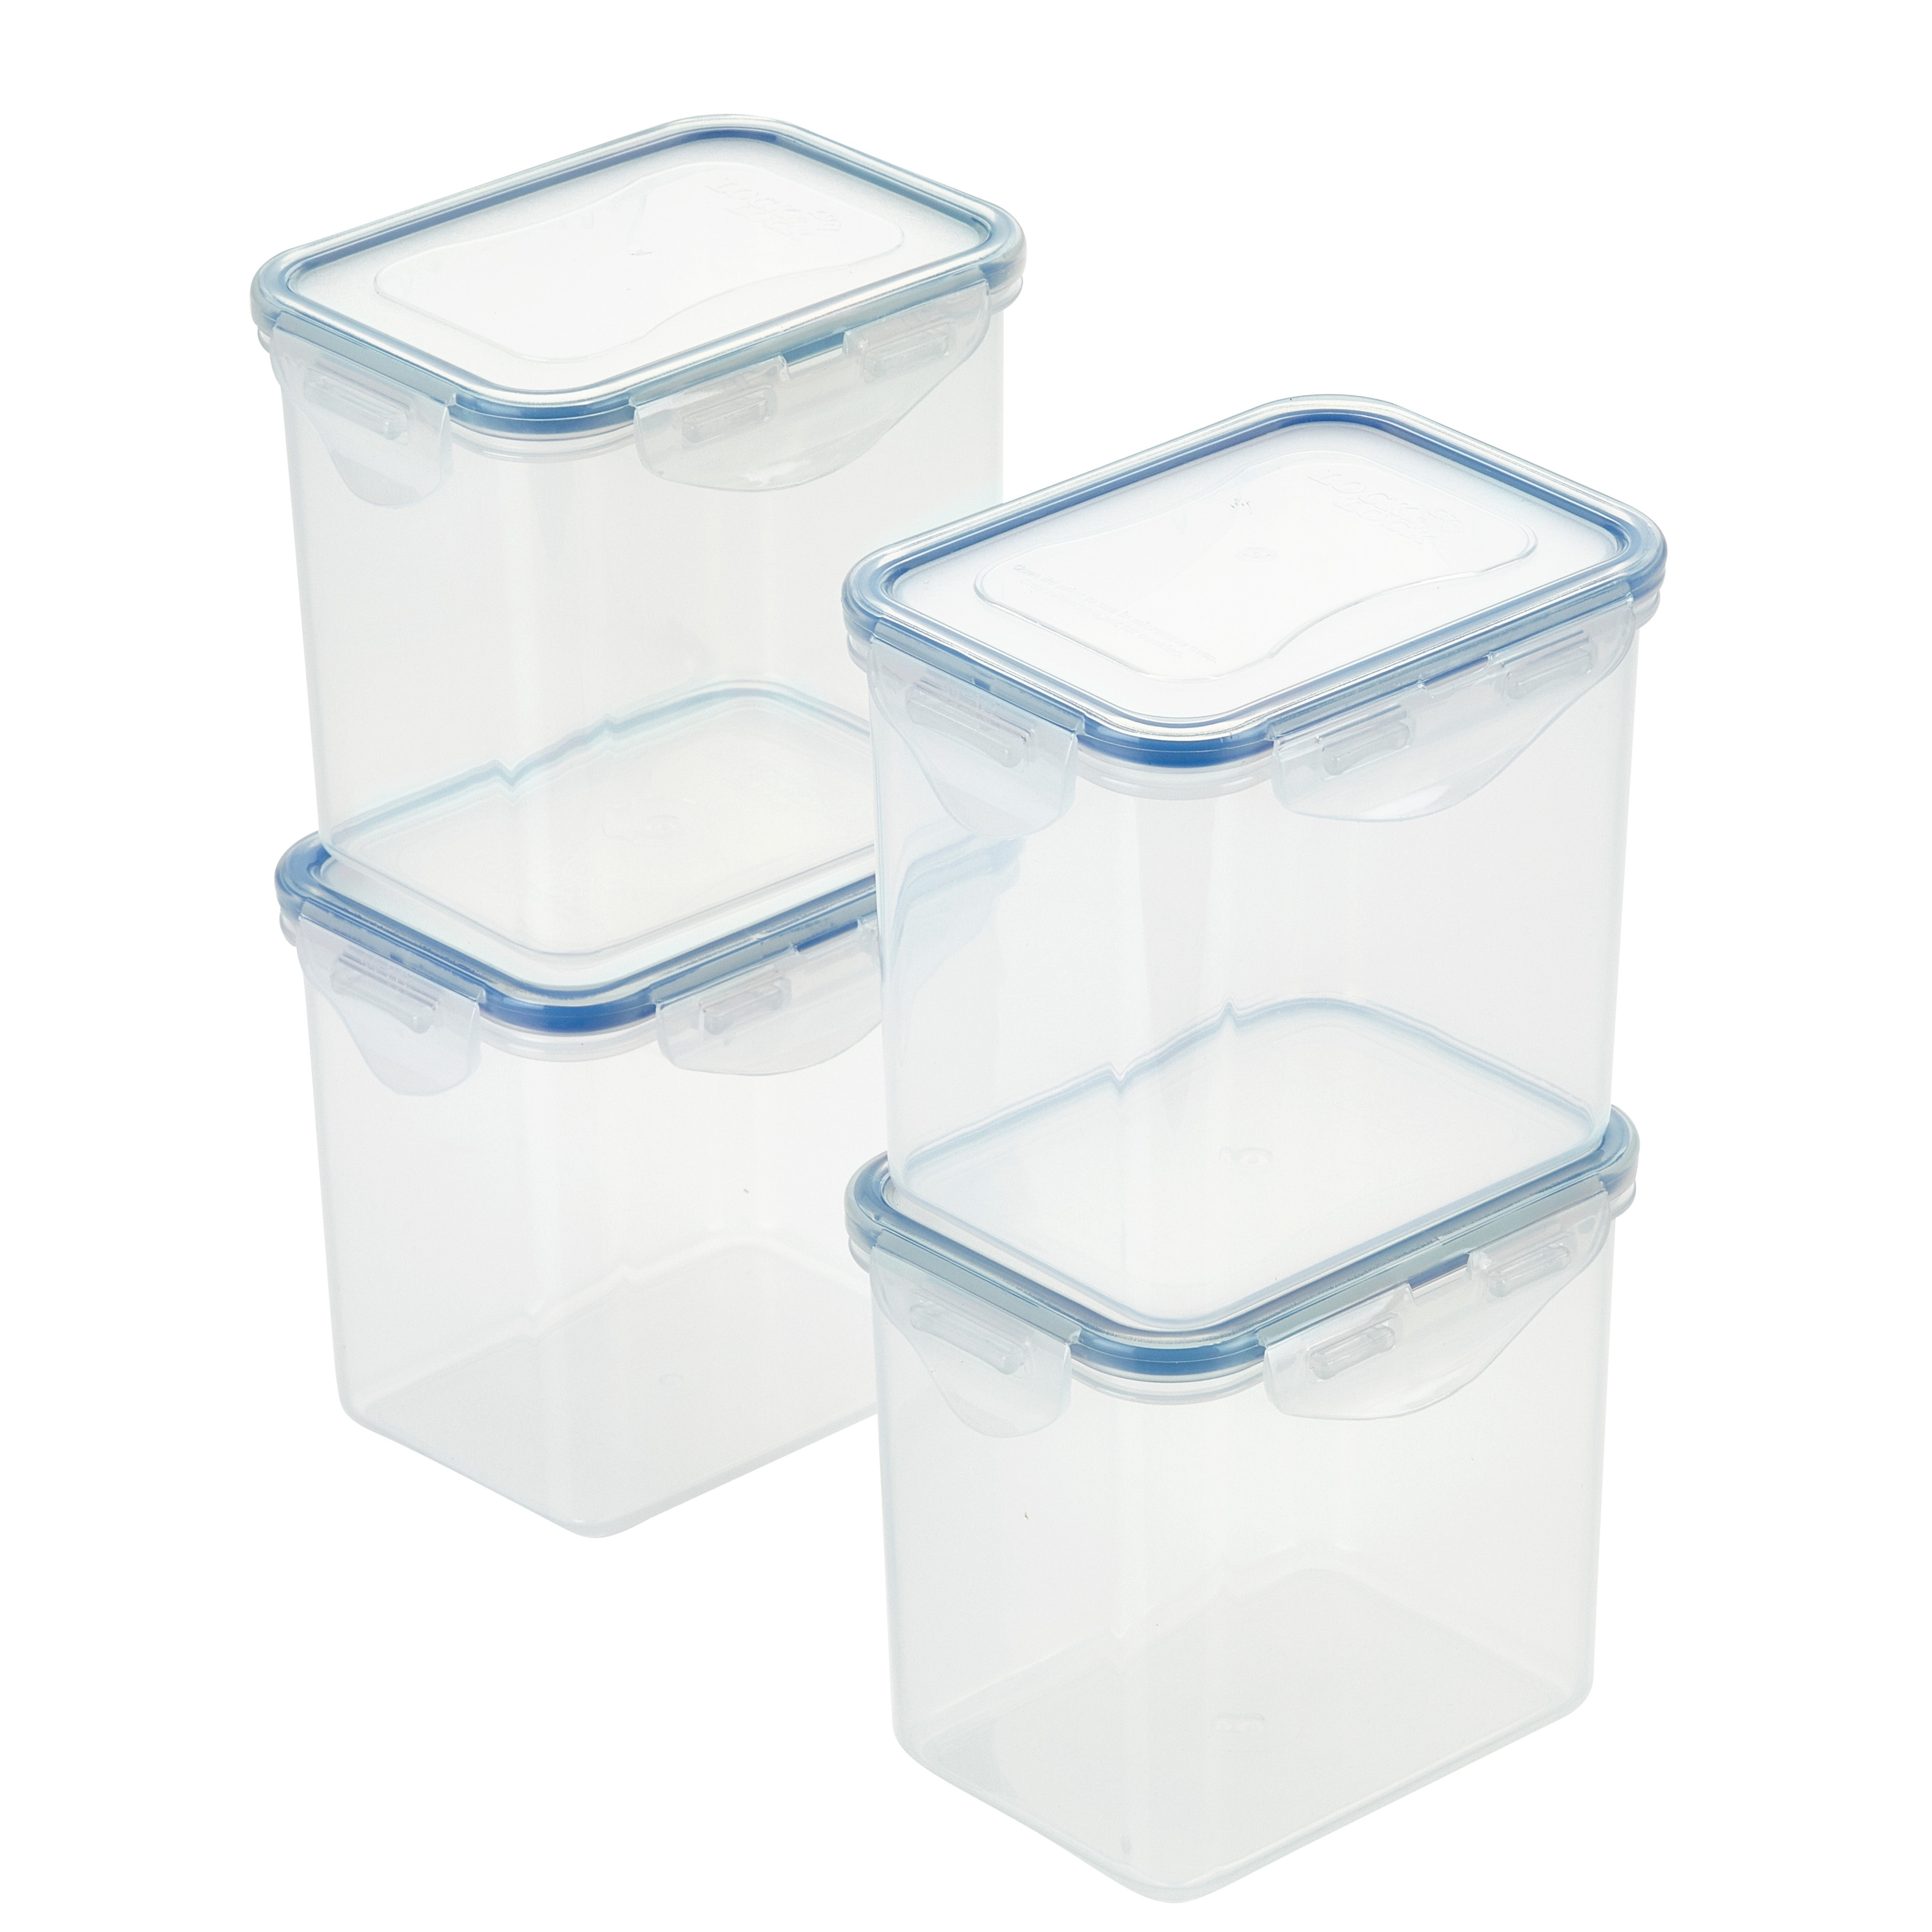 https://ak1.ostkcdn.com/images/products/is/images/direct/f1c635a6174dfb6ab14cbdd56303d8f614ca9ae7/Easy-Essentials-Pantry-3.6-Cup-Rectangular-Food-Storage-Containers%2C-Set-of-4.jpg